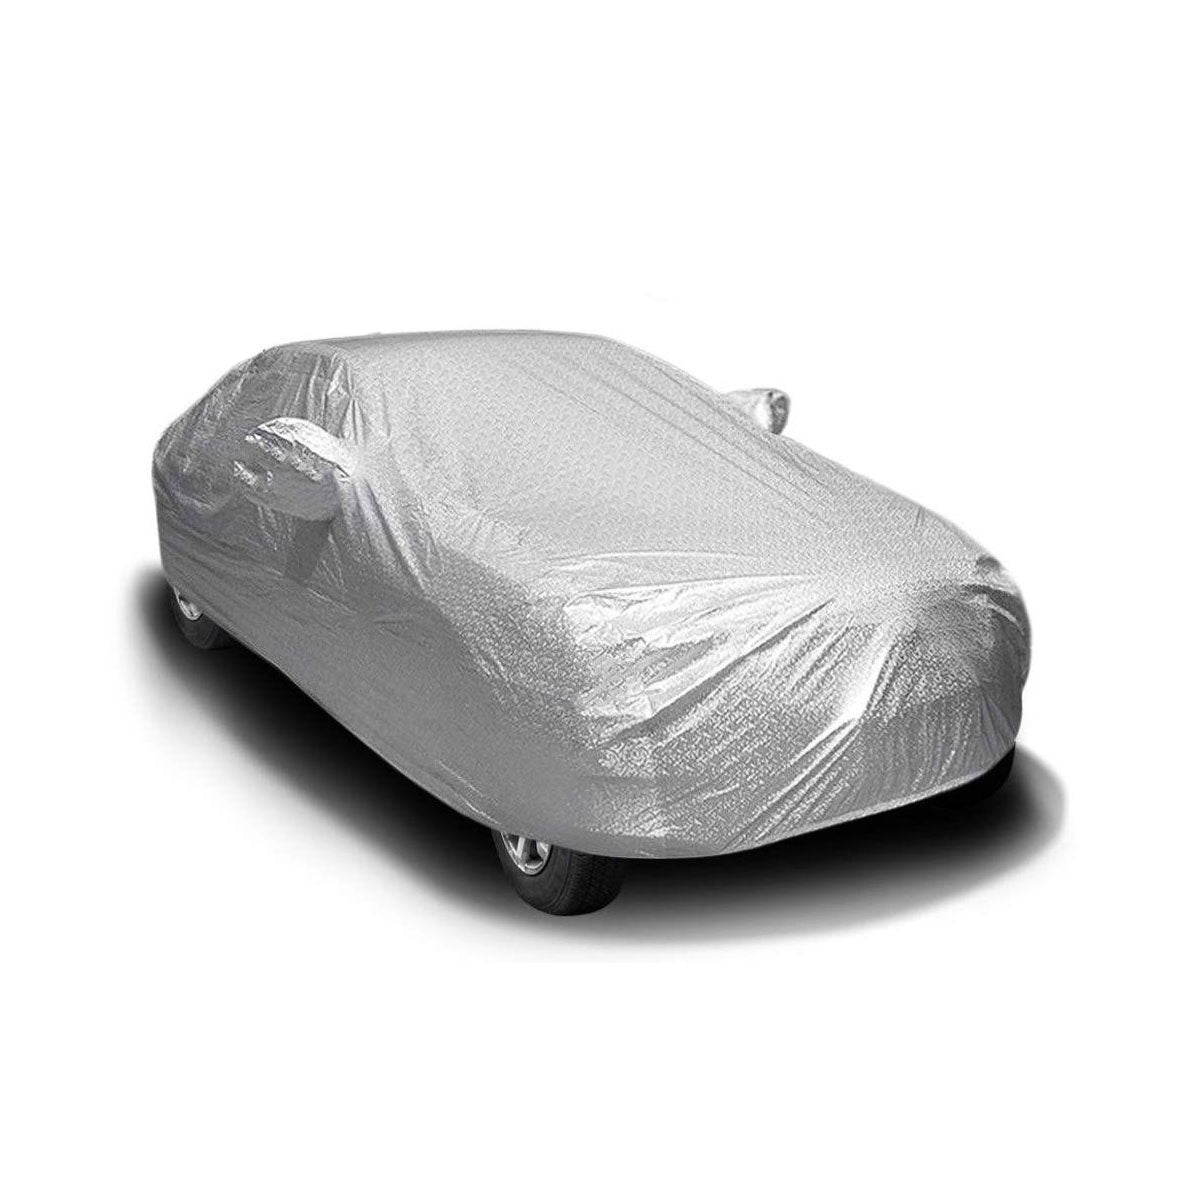 Oshotto Spyro Silver Anti Reflective, dustproof and Water Proof Car Body Cover with Mirror Pockets For KIA Seltos